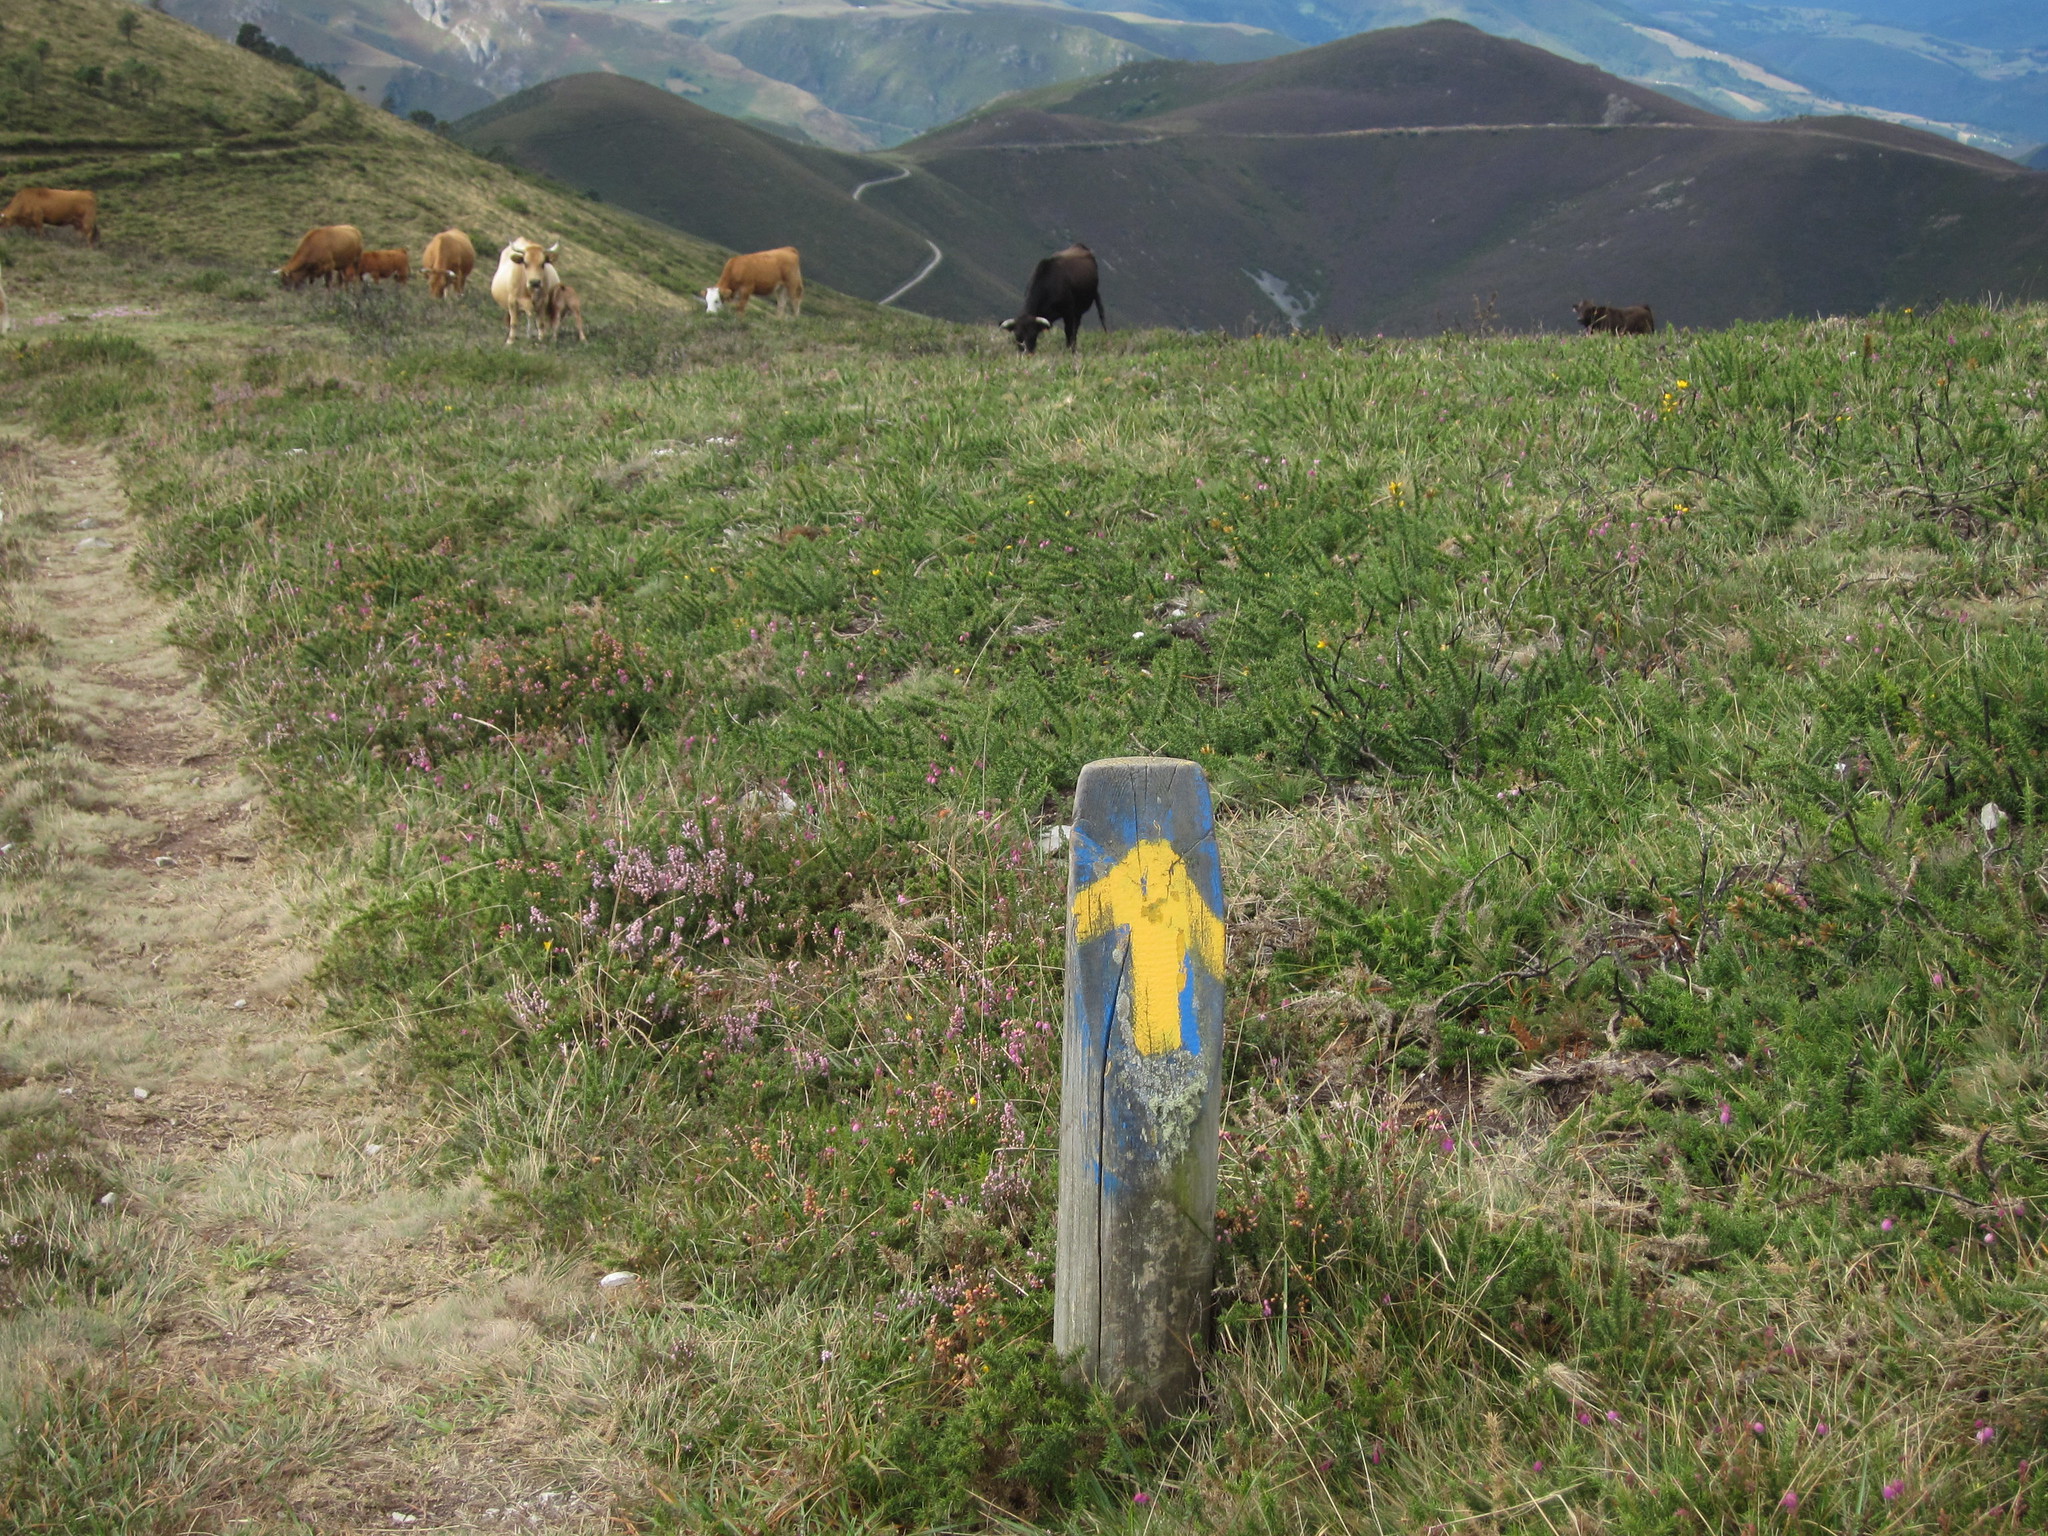 Landscape in Asturias, Spain. A yellow arrow is being shown in the image.